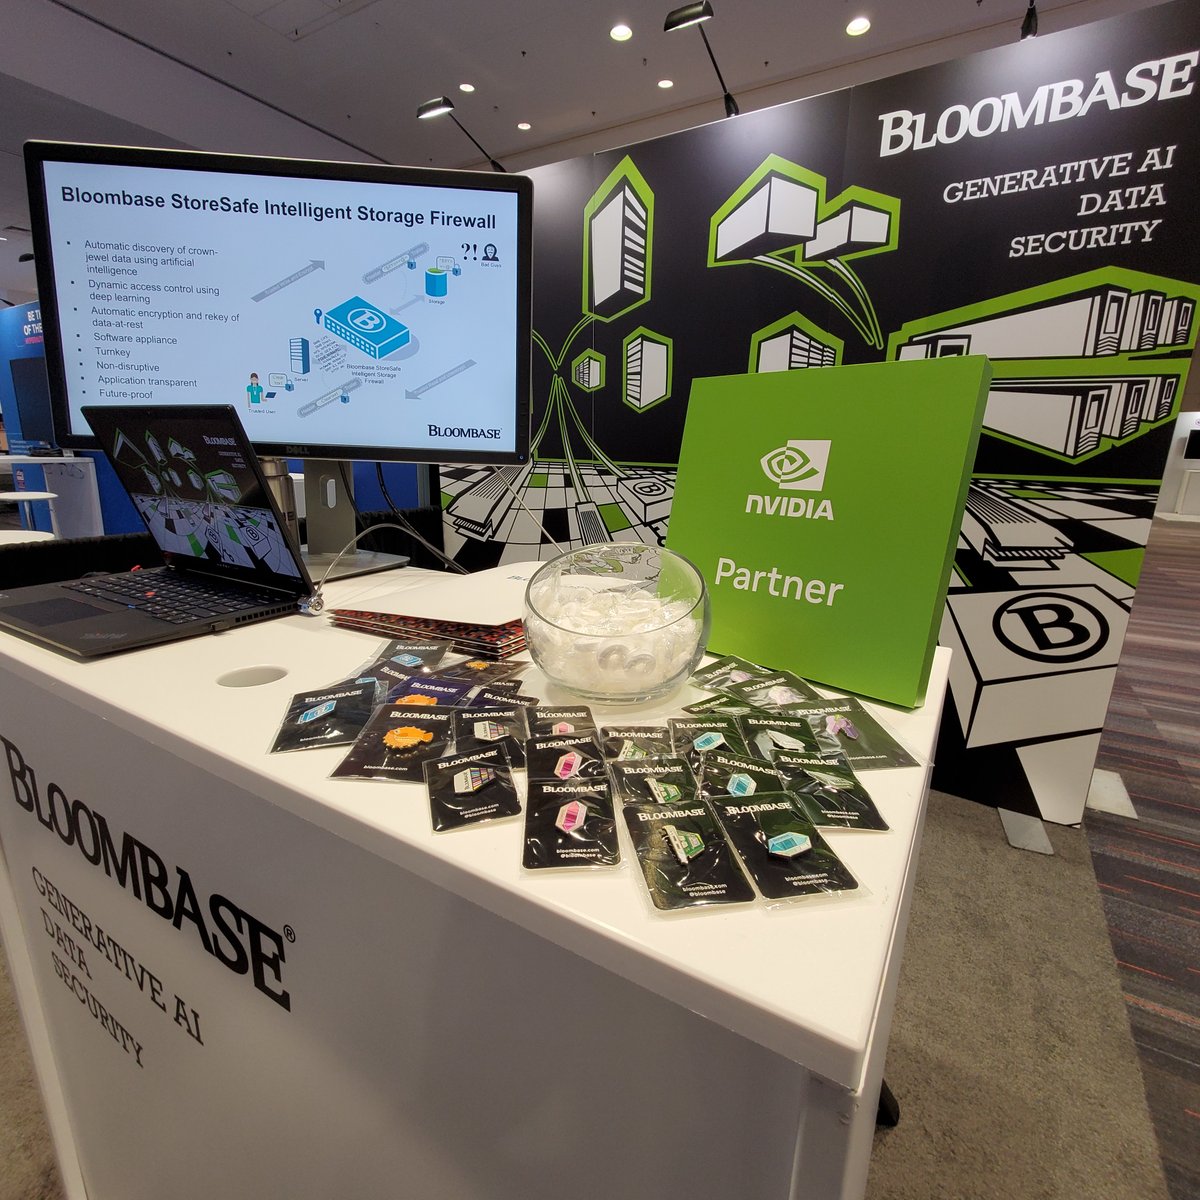 📢 #RSAC24 last call! Demystify #GenAISecurity & quantum-safe #encryption. Demos, swag & the answers you need await at booth 4504 at @RSAConference in Moscone Center – don’t miss out! 👋 #Bloombase #DataCloudSecurity #PQC #RSAConference #RSAC #RSAC2024